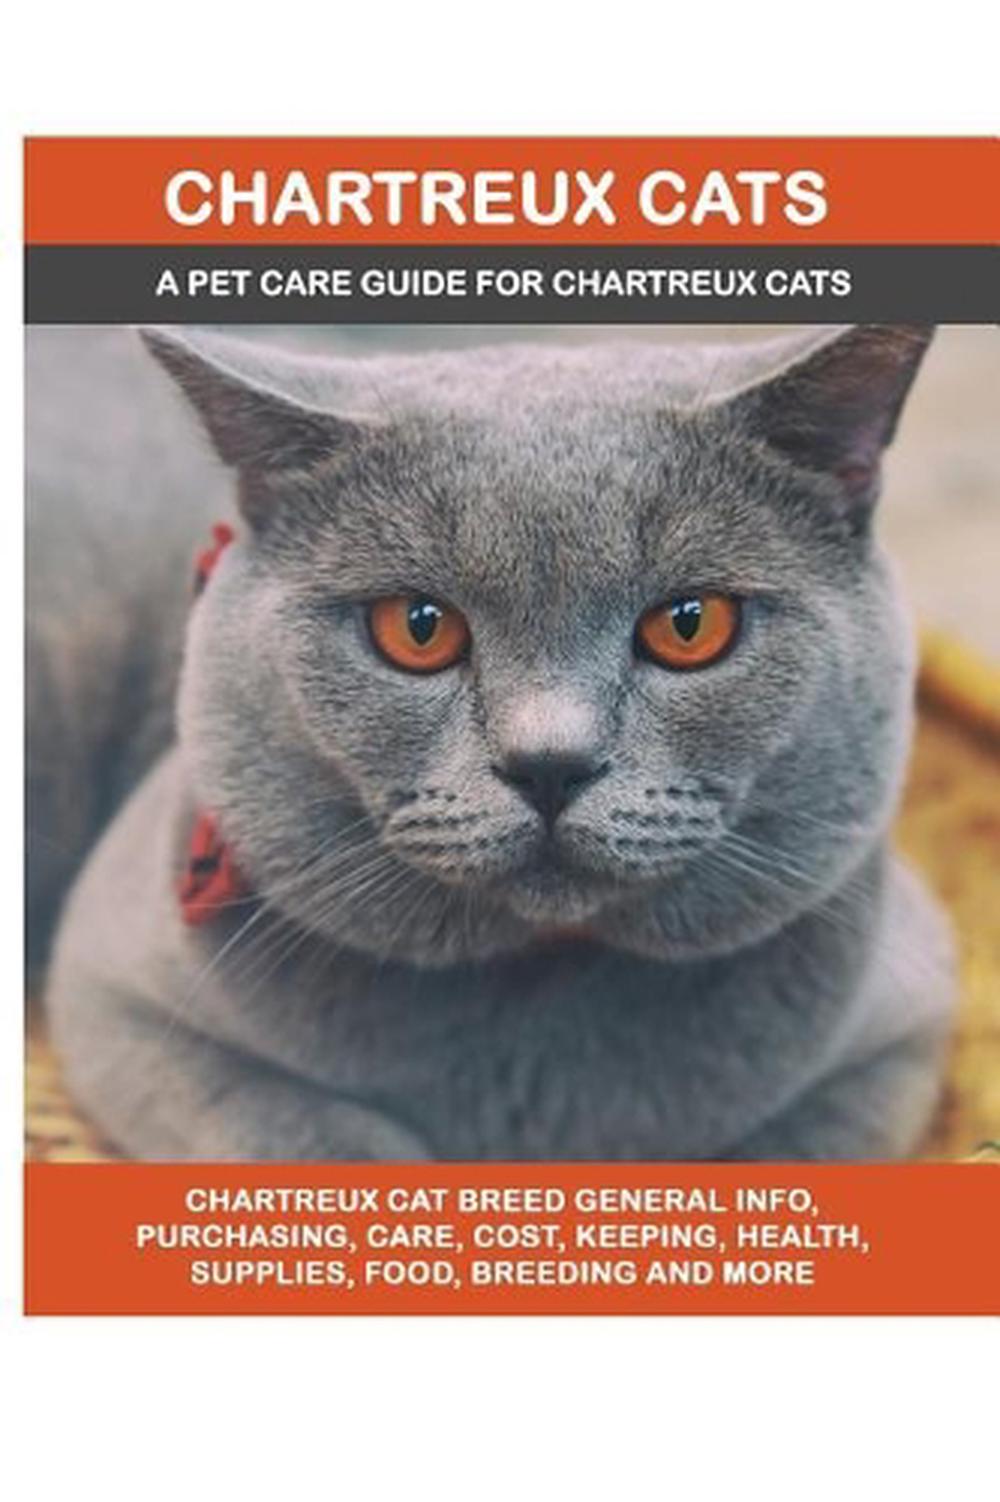 Chartreux Cats A Pet Care Guide for Chartreux Cats by Lolly Brown